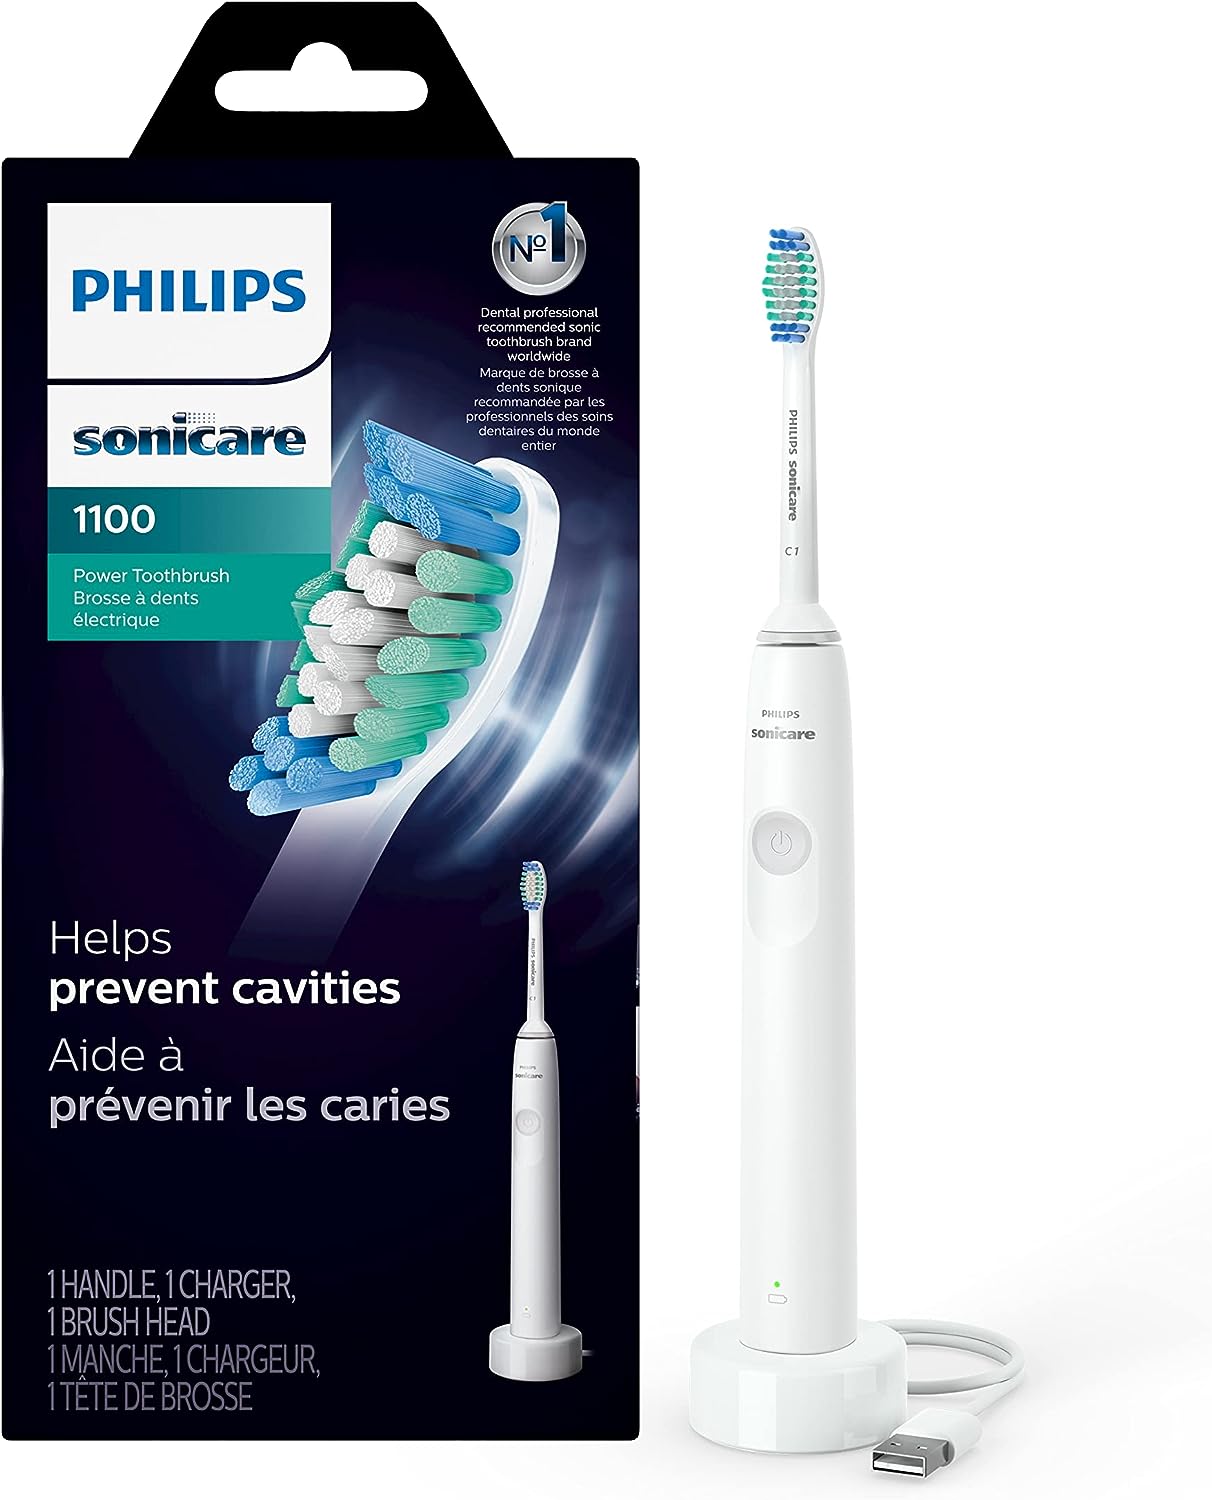 Philips Sonicare 1100 Rechargeable Electric Toothbrush (White Grey, HX3641/02) $20 + Free Shipping w/ Prime or on orders over $35